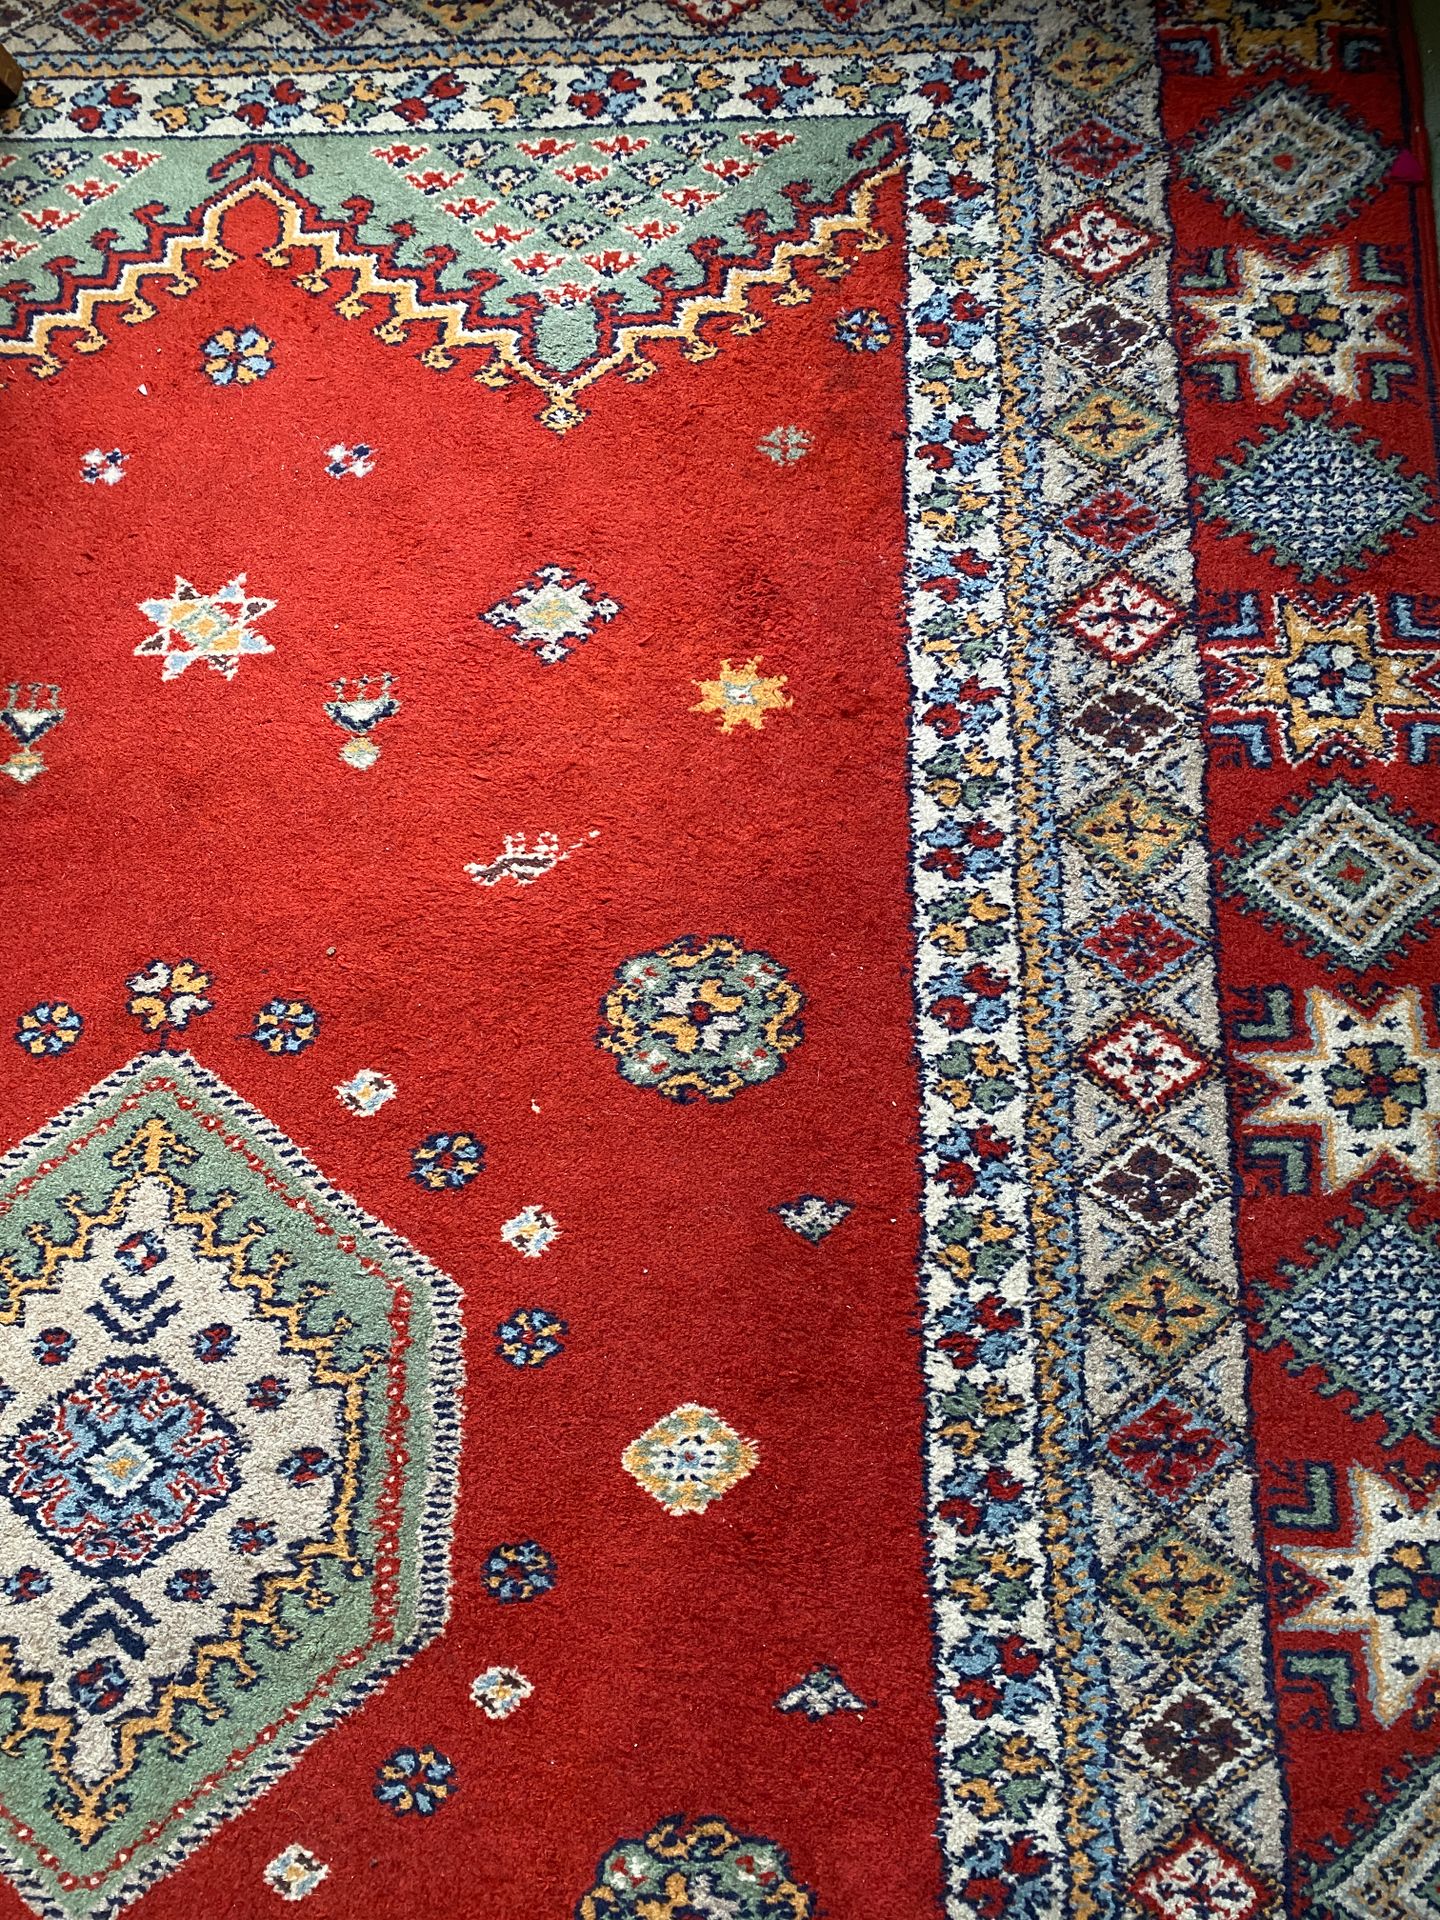 Null Carpet with red background

(sale January 20, 2022)